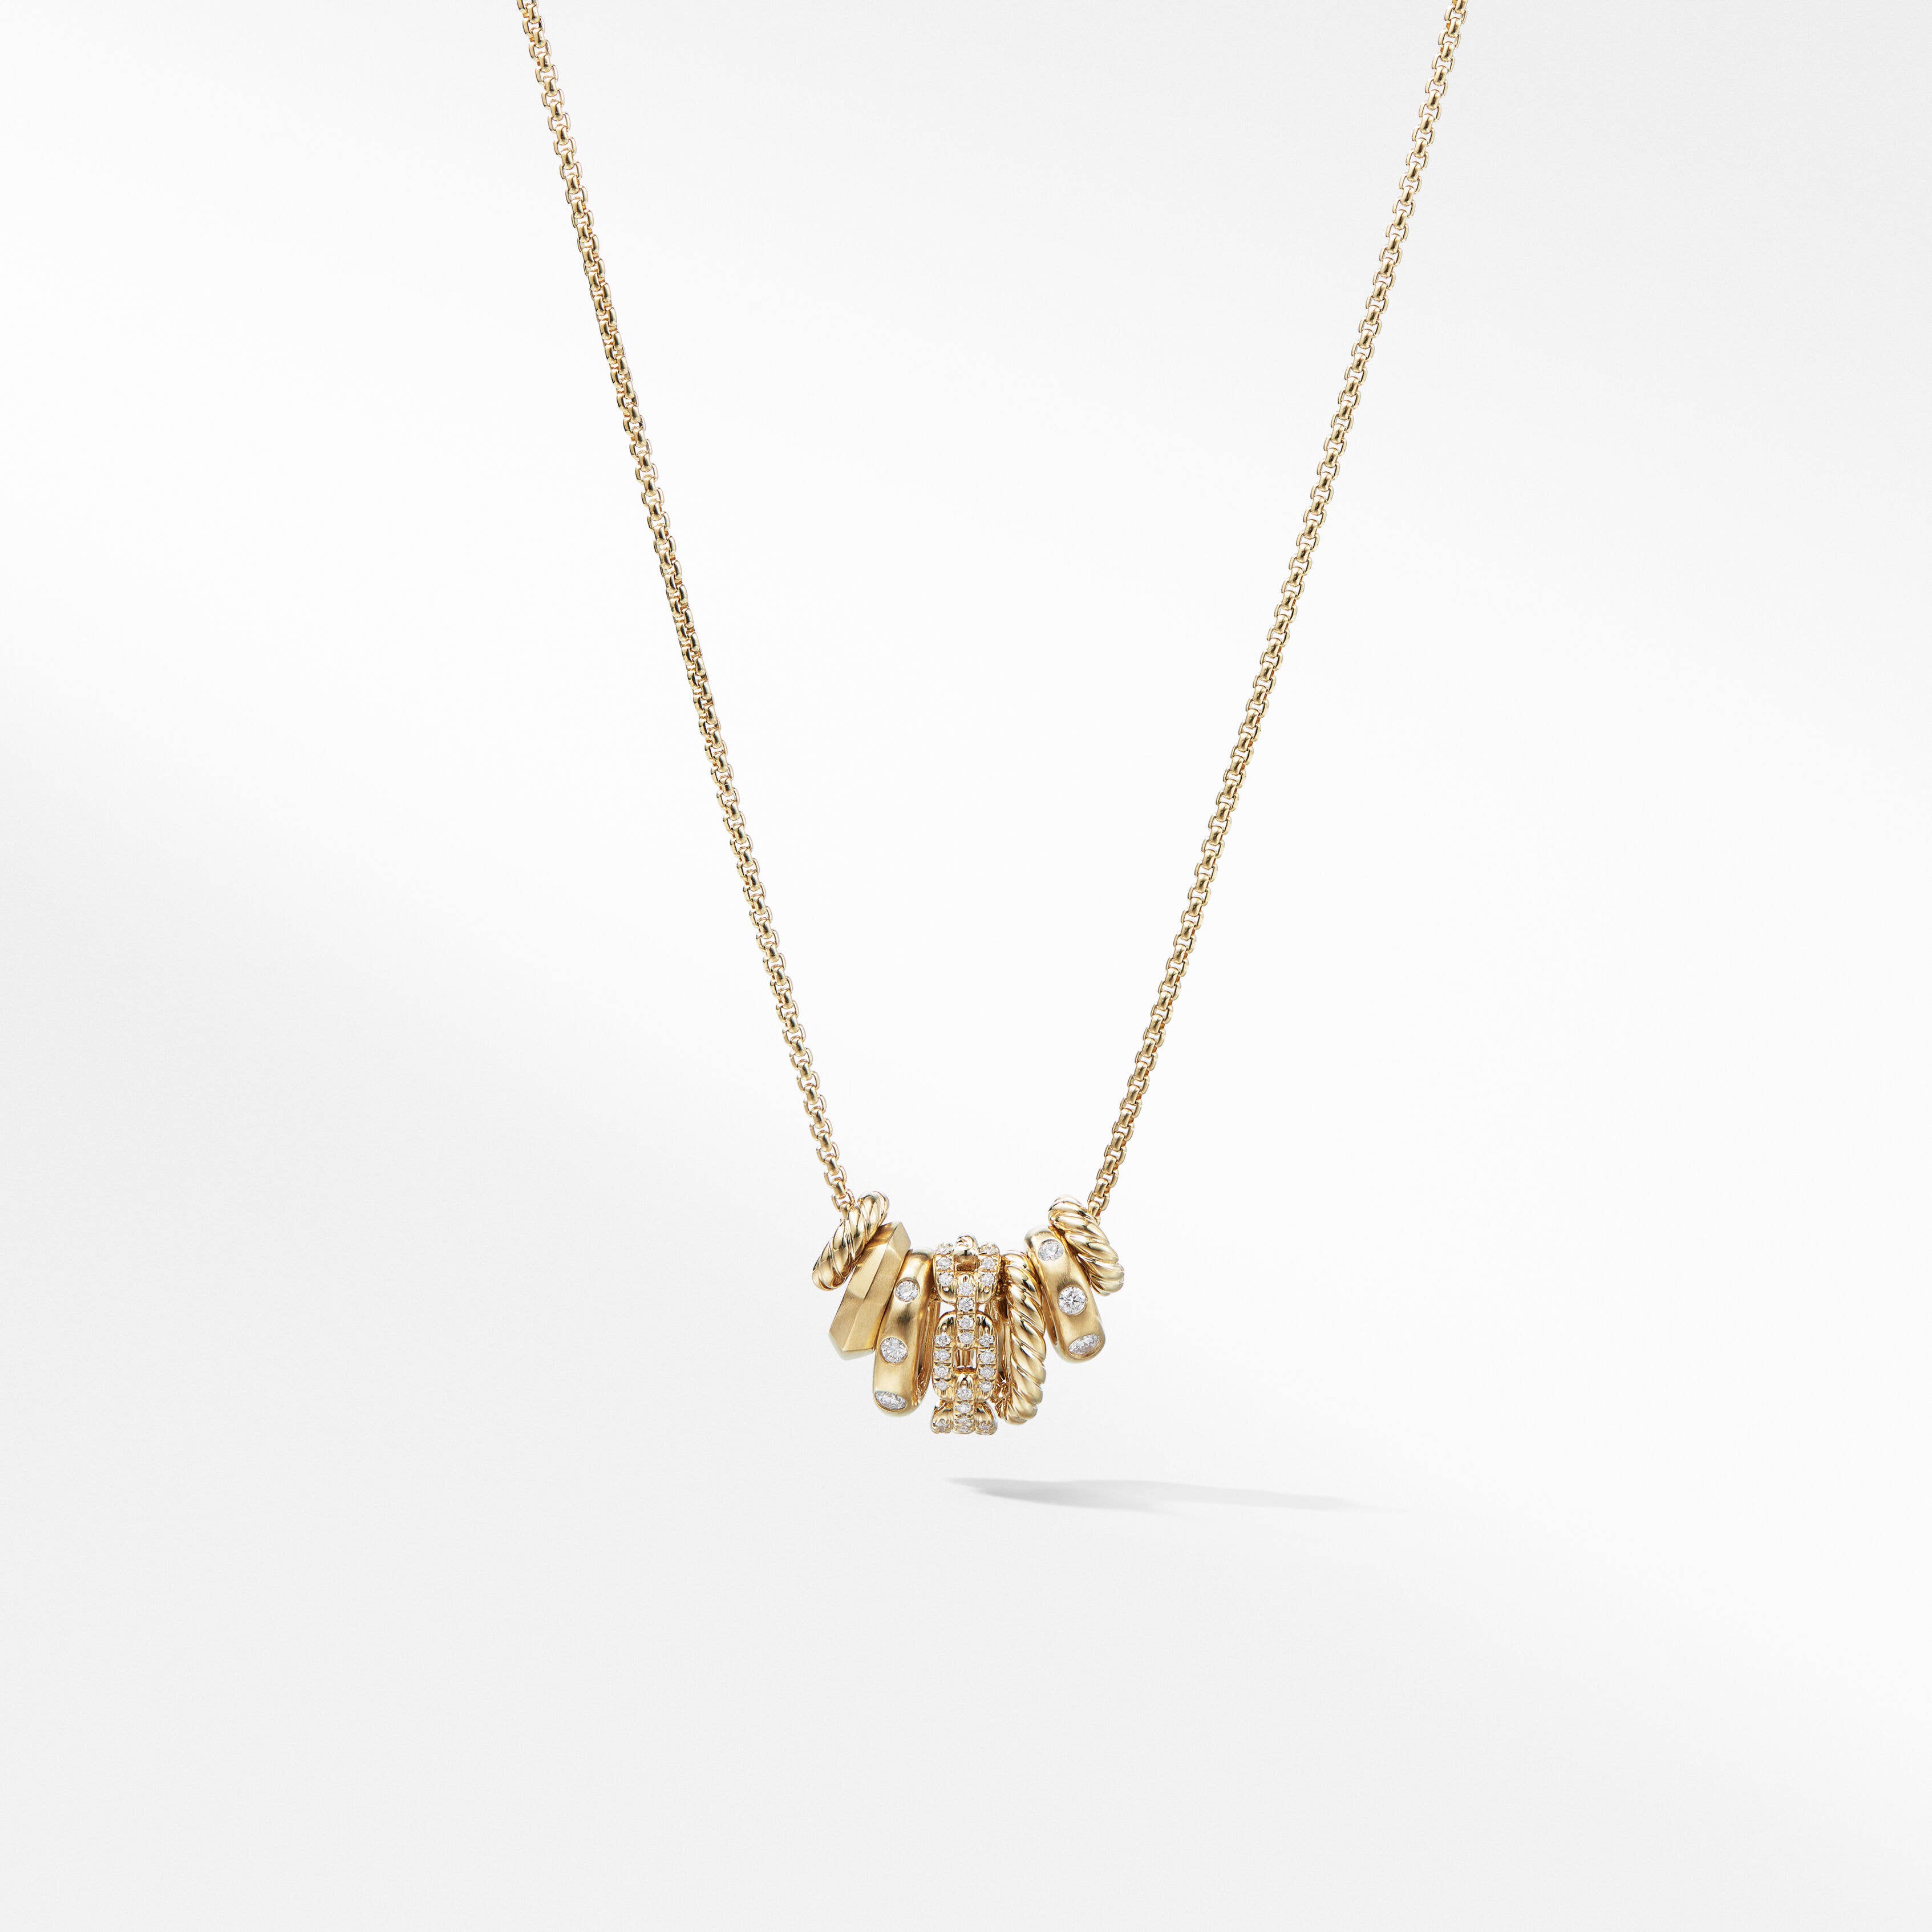 Stax Rondelle Pendant Necklace in 18K Yellow Gold with Pavé Diamonds